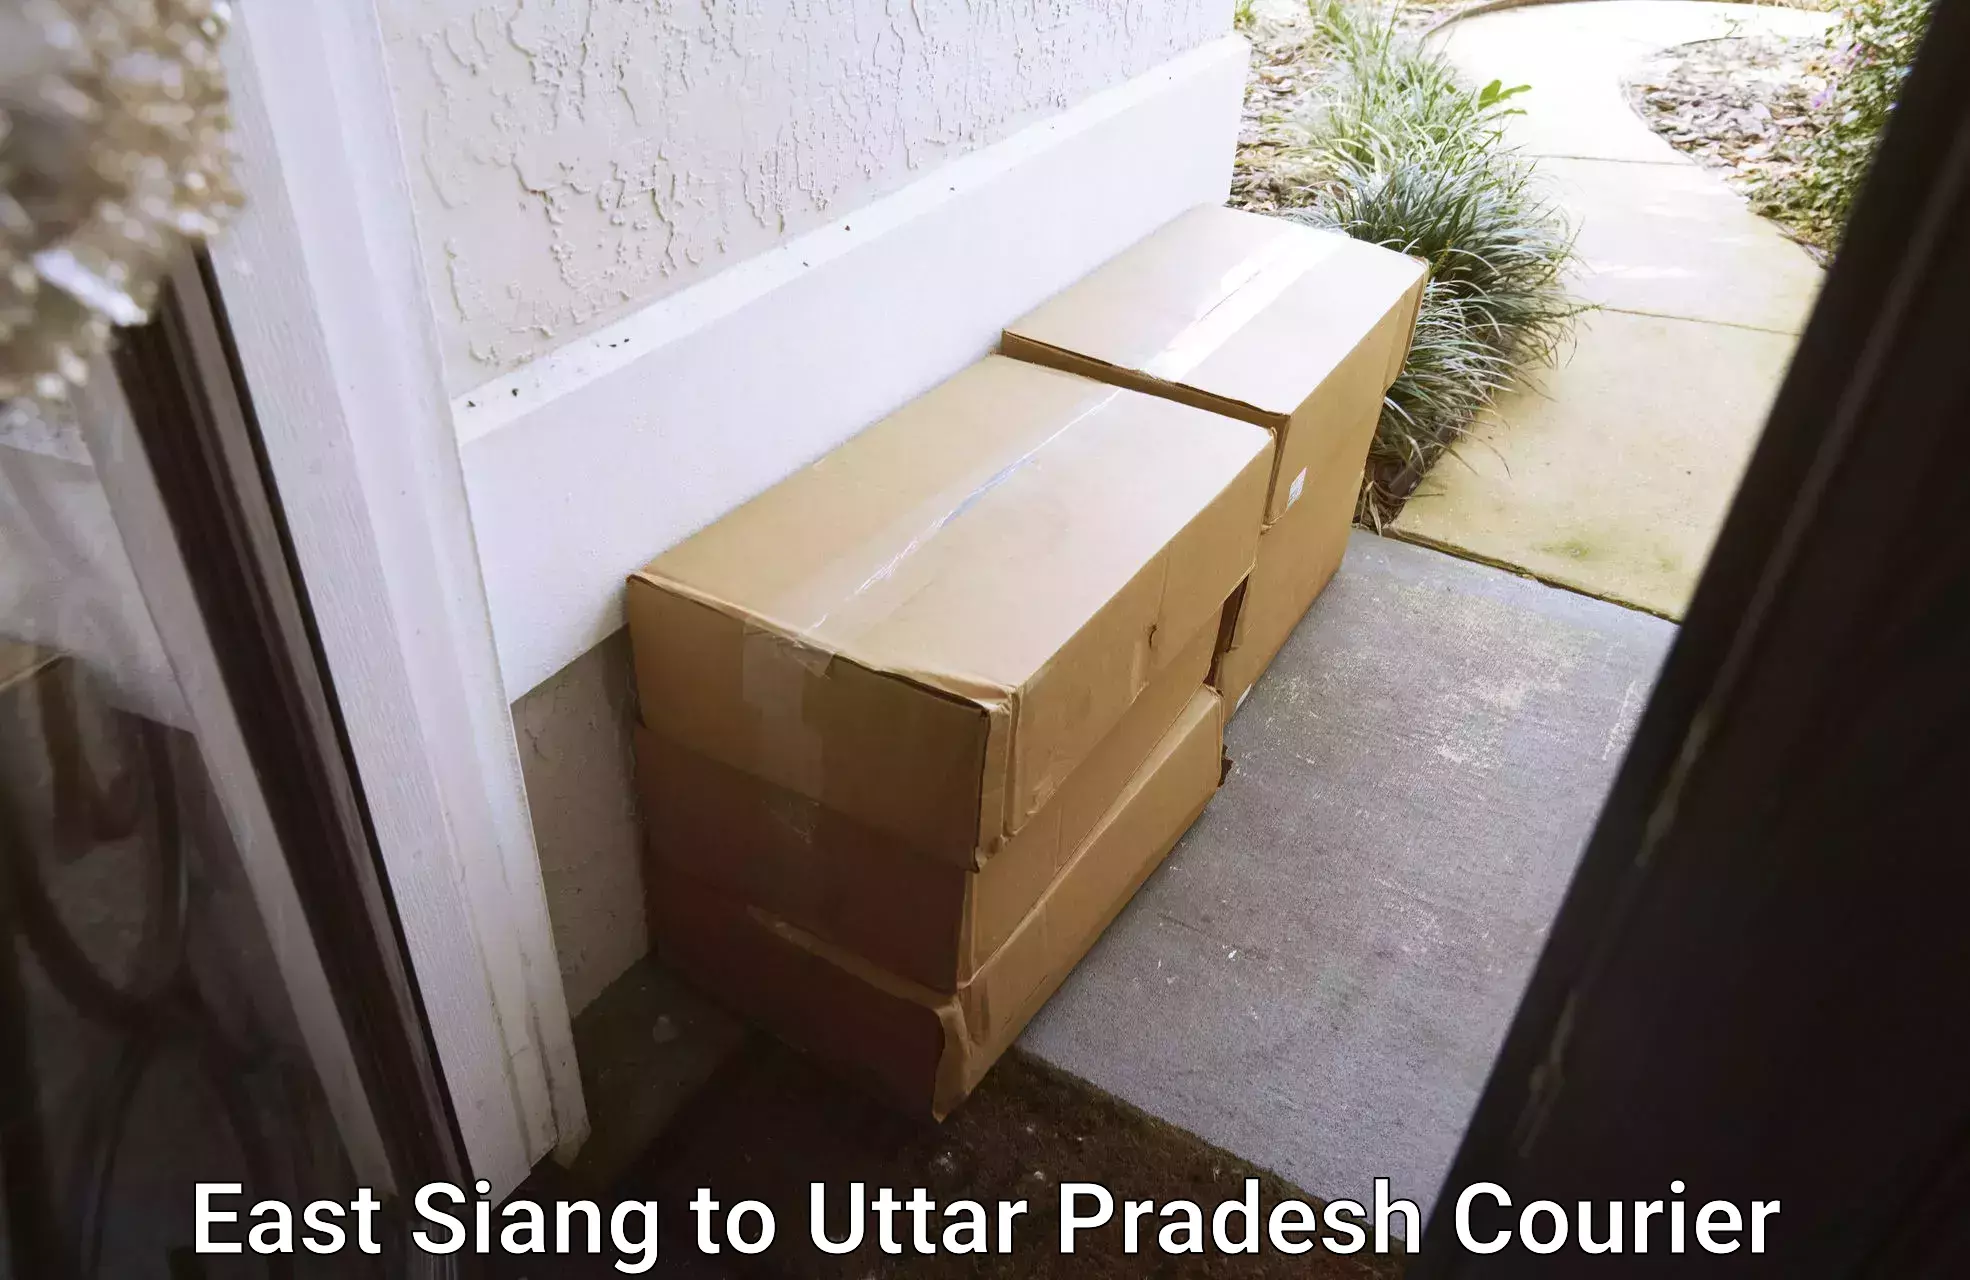 Urgent courier needs in East Siang to Etah